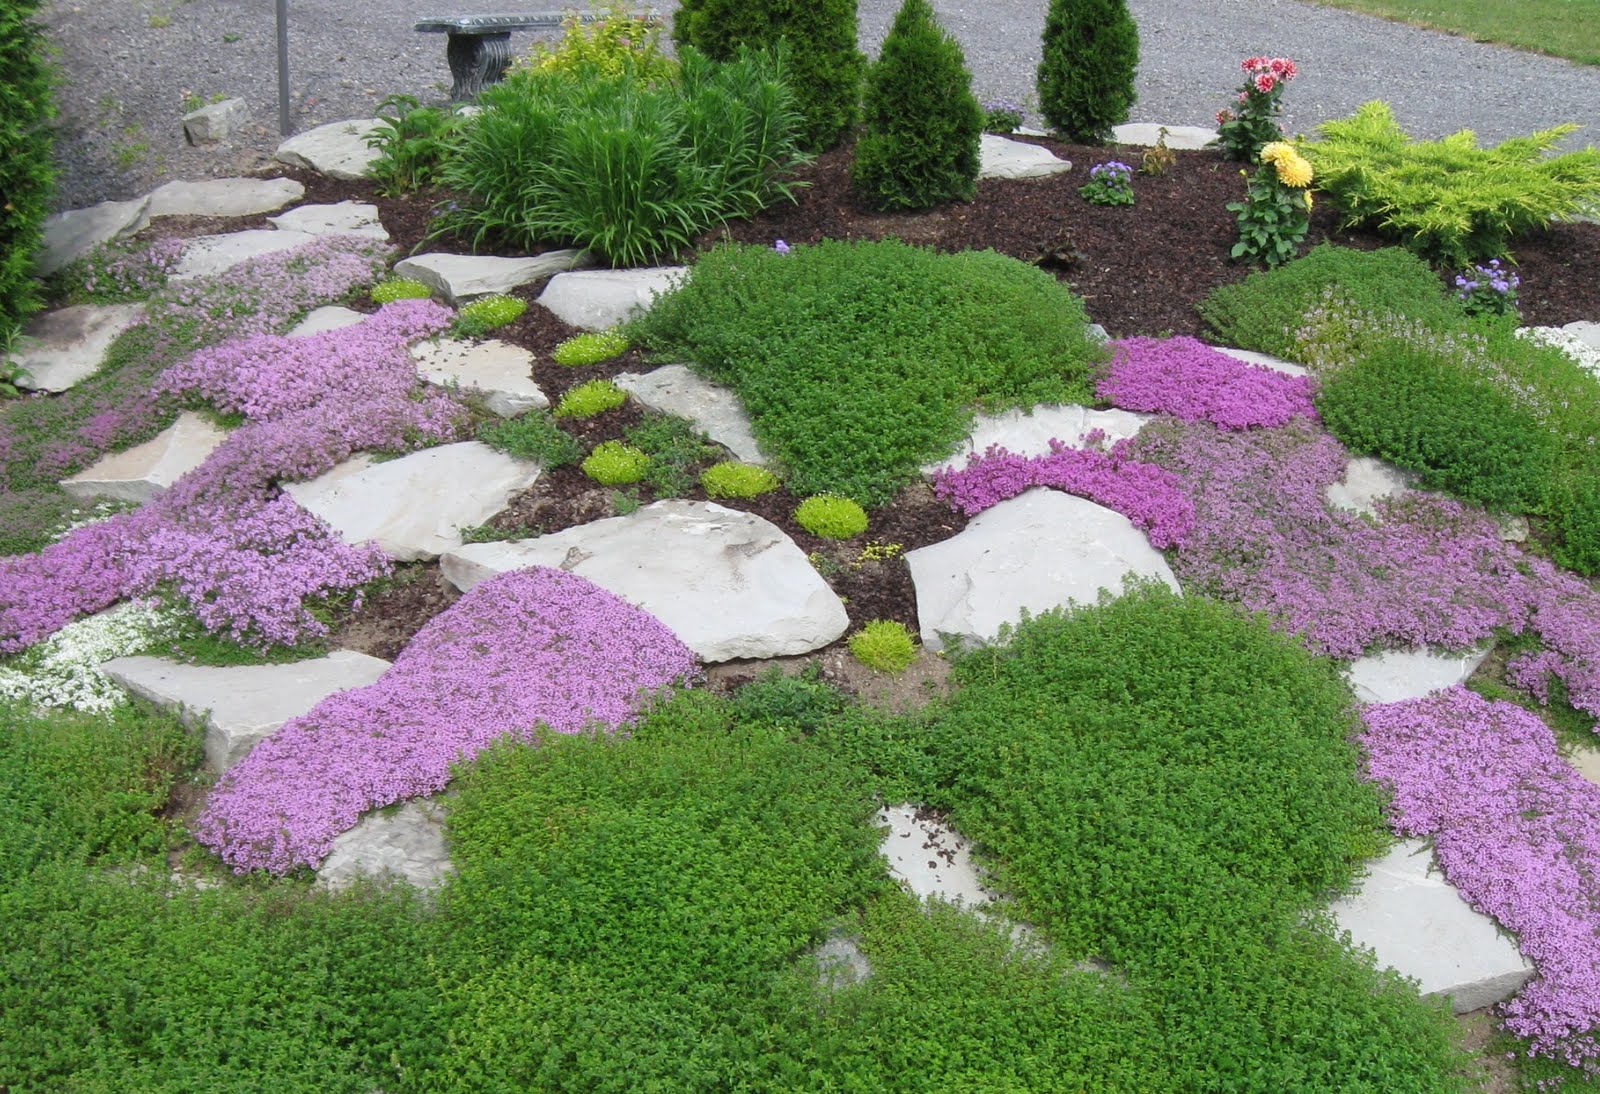 Rock Garden Decor | Home Design, Decorating and Remodeling Ideas